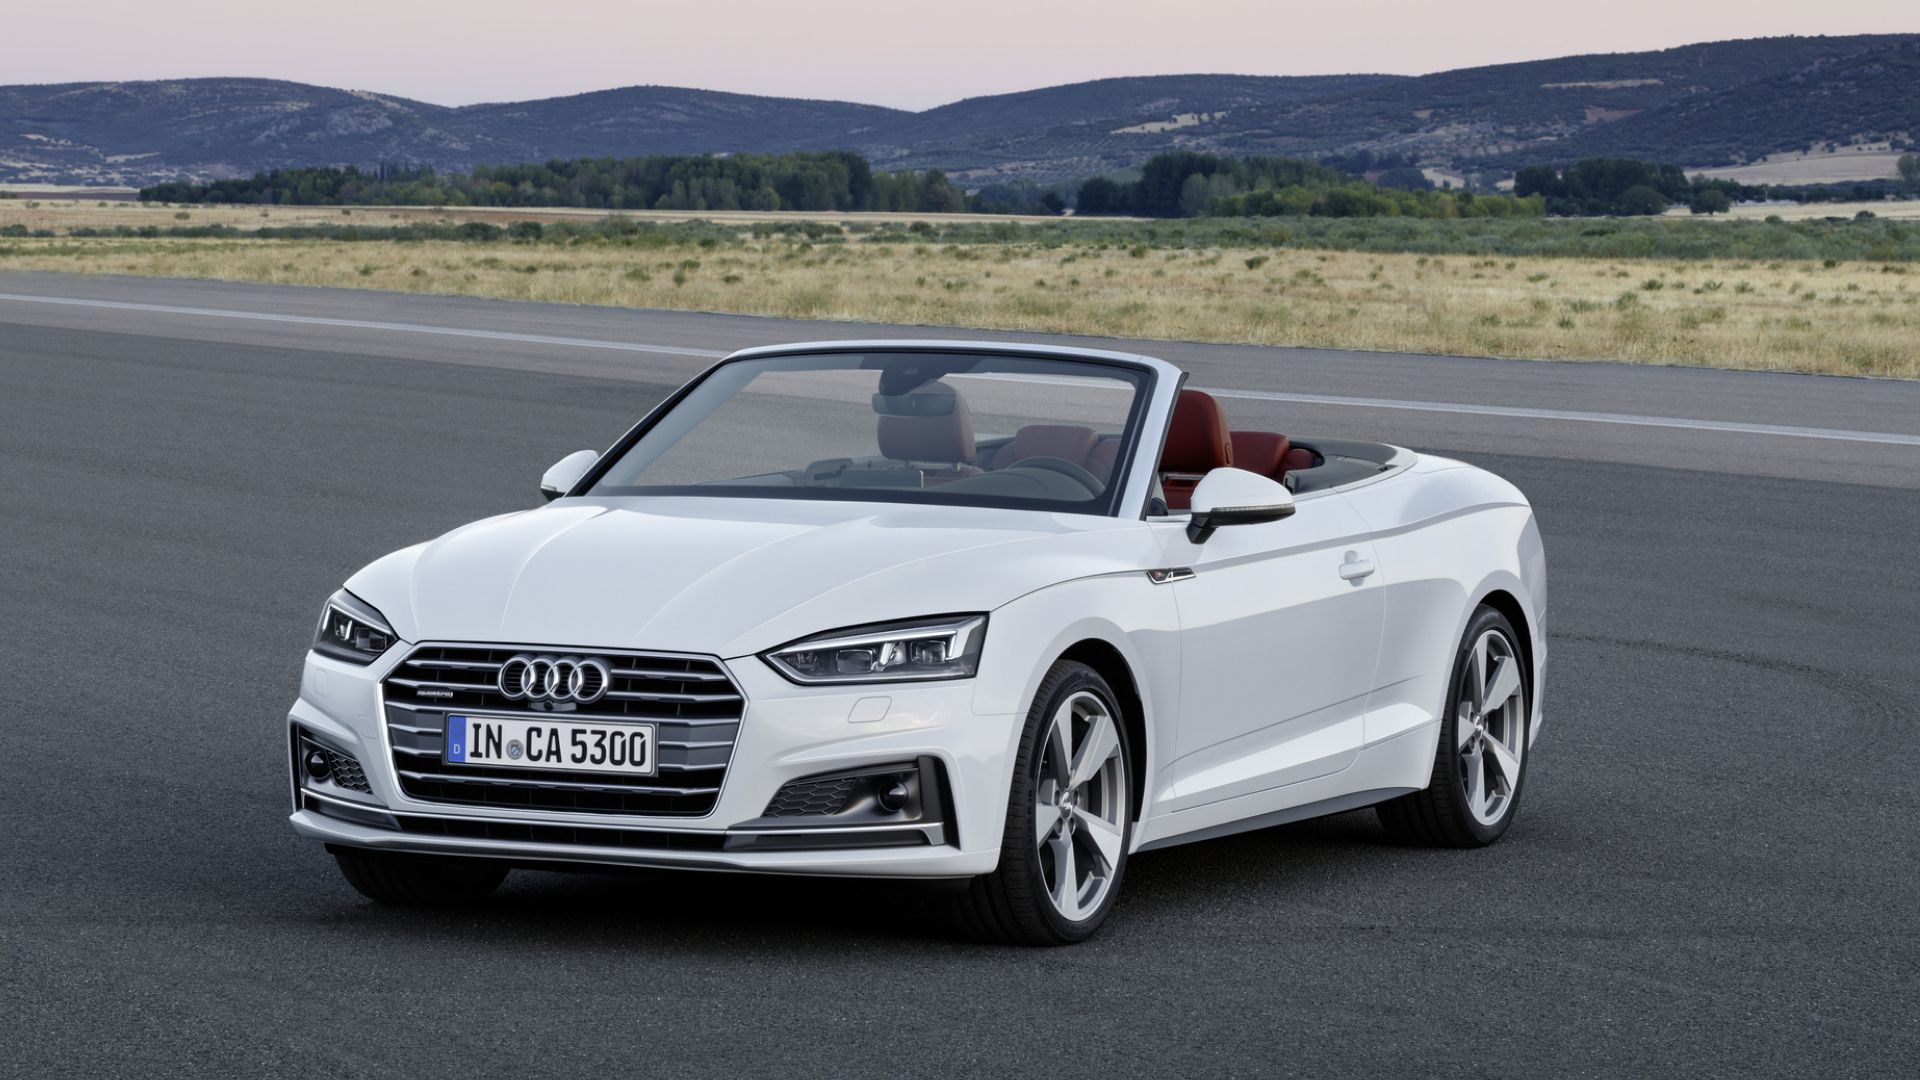 2018 Audi A5 Cabriolet in white posing in front of mountains